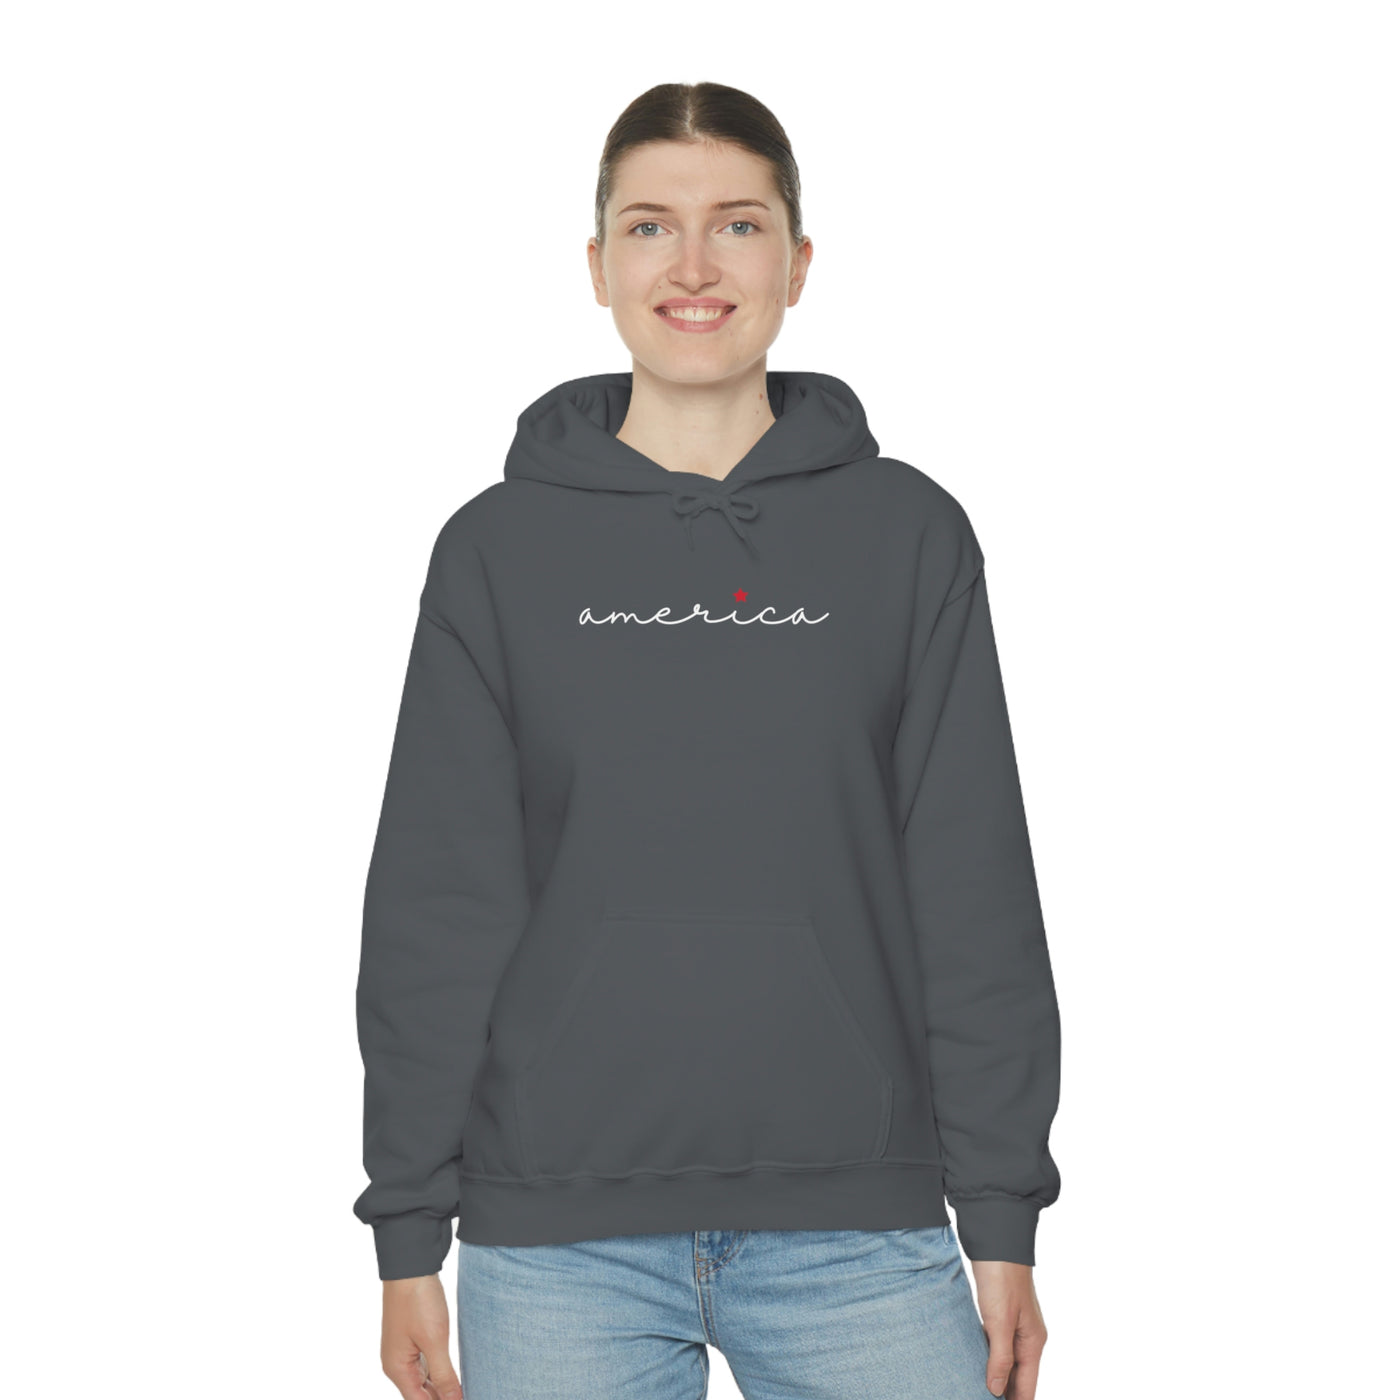 4th of july america hoodie grey for women